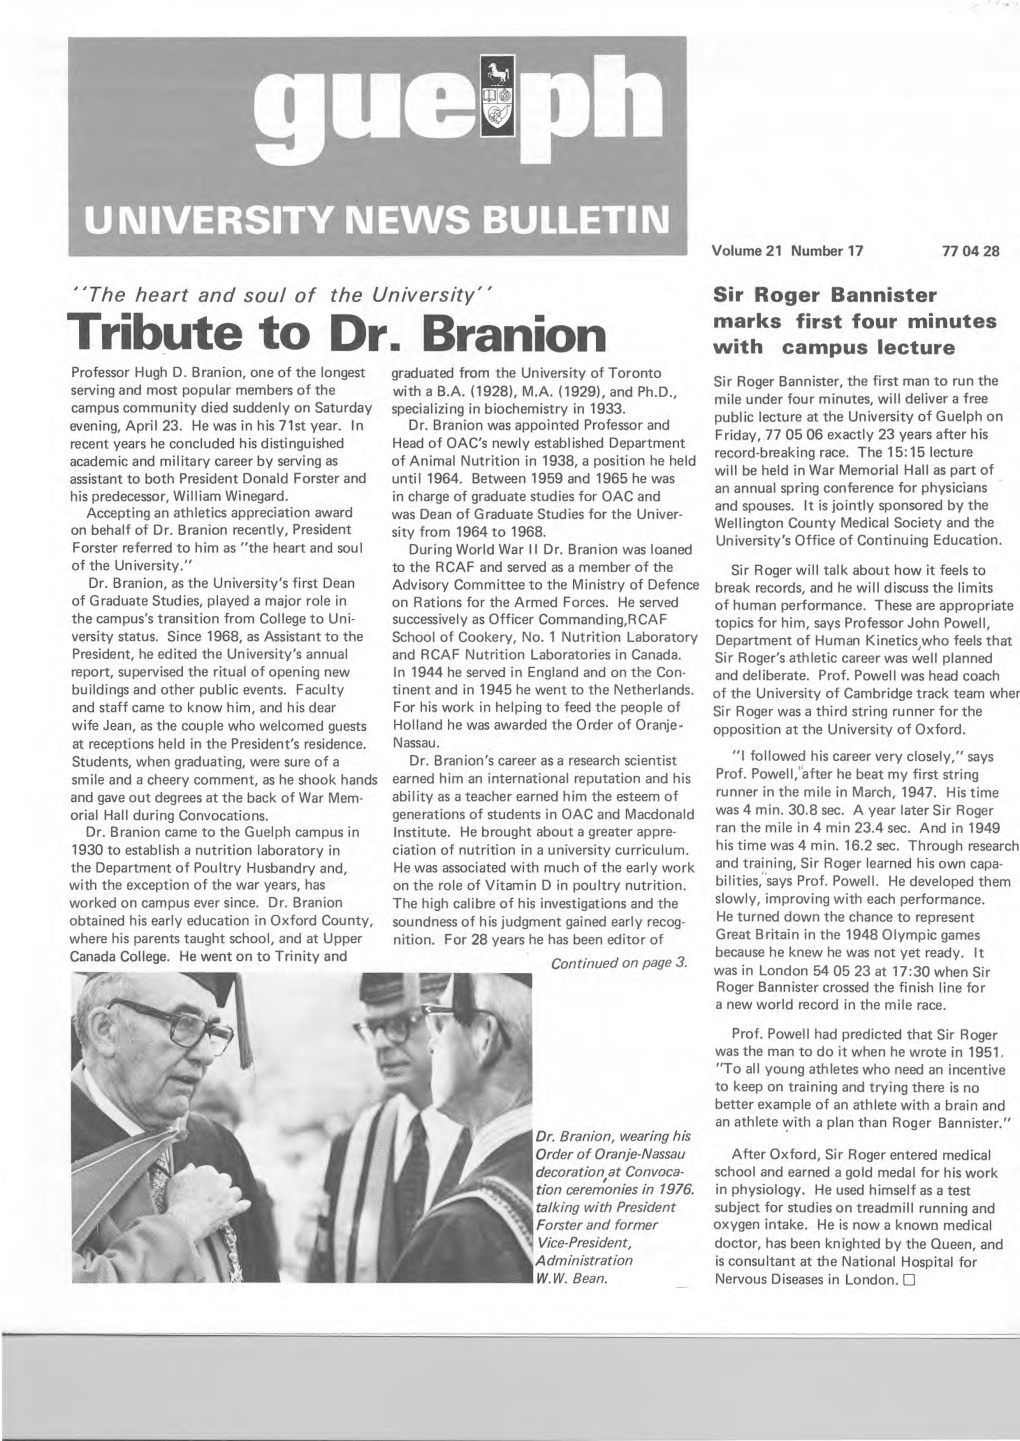 Tribute to Dr. Branion with Campus Lecture Professor Hugh D